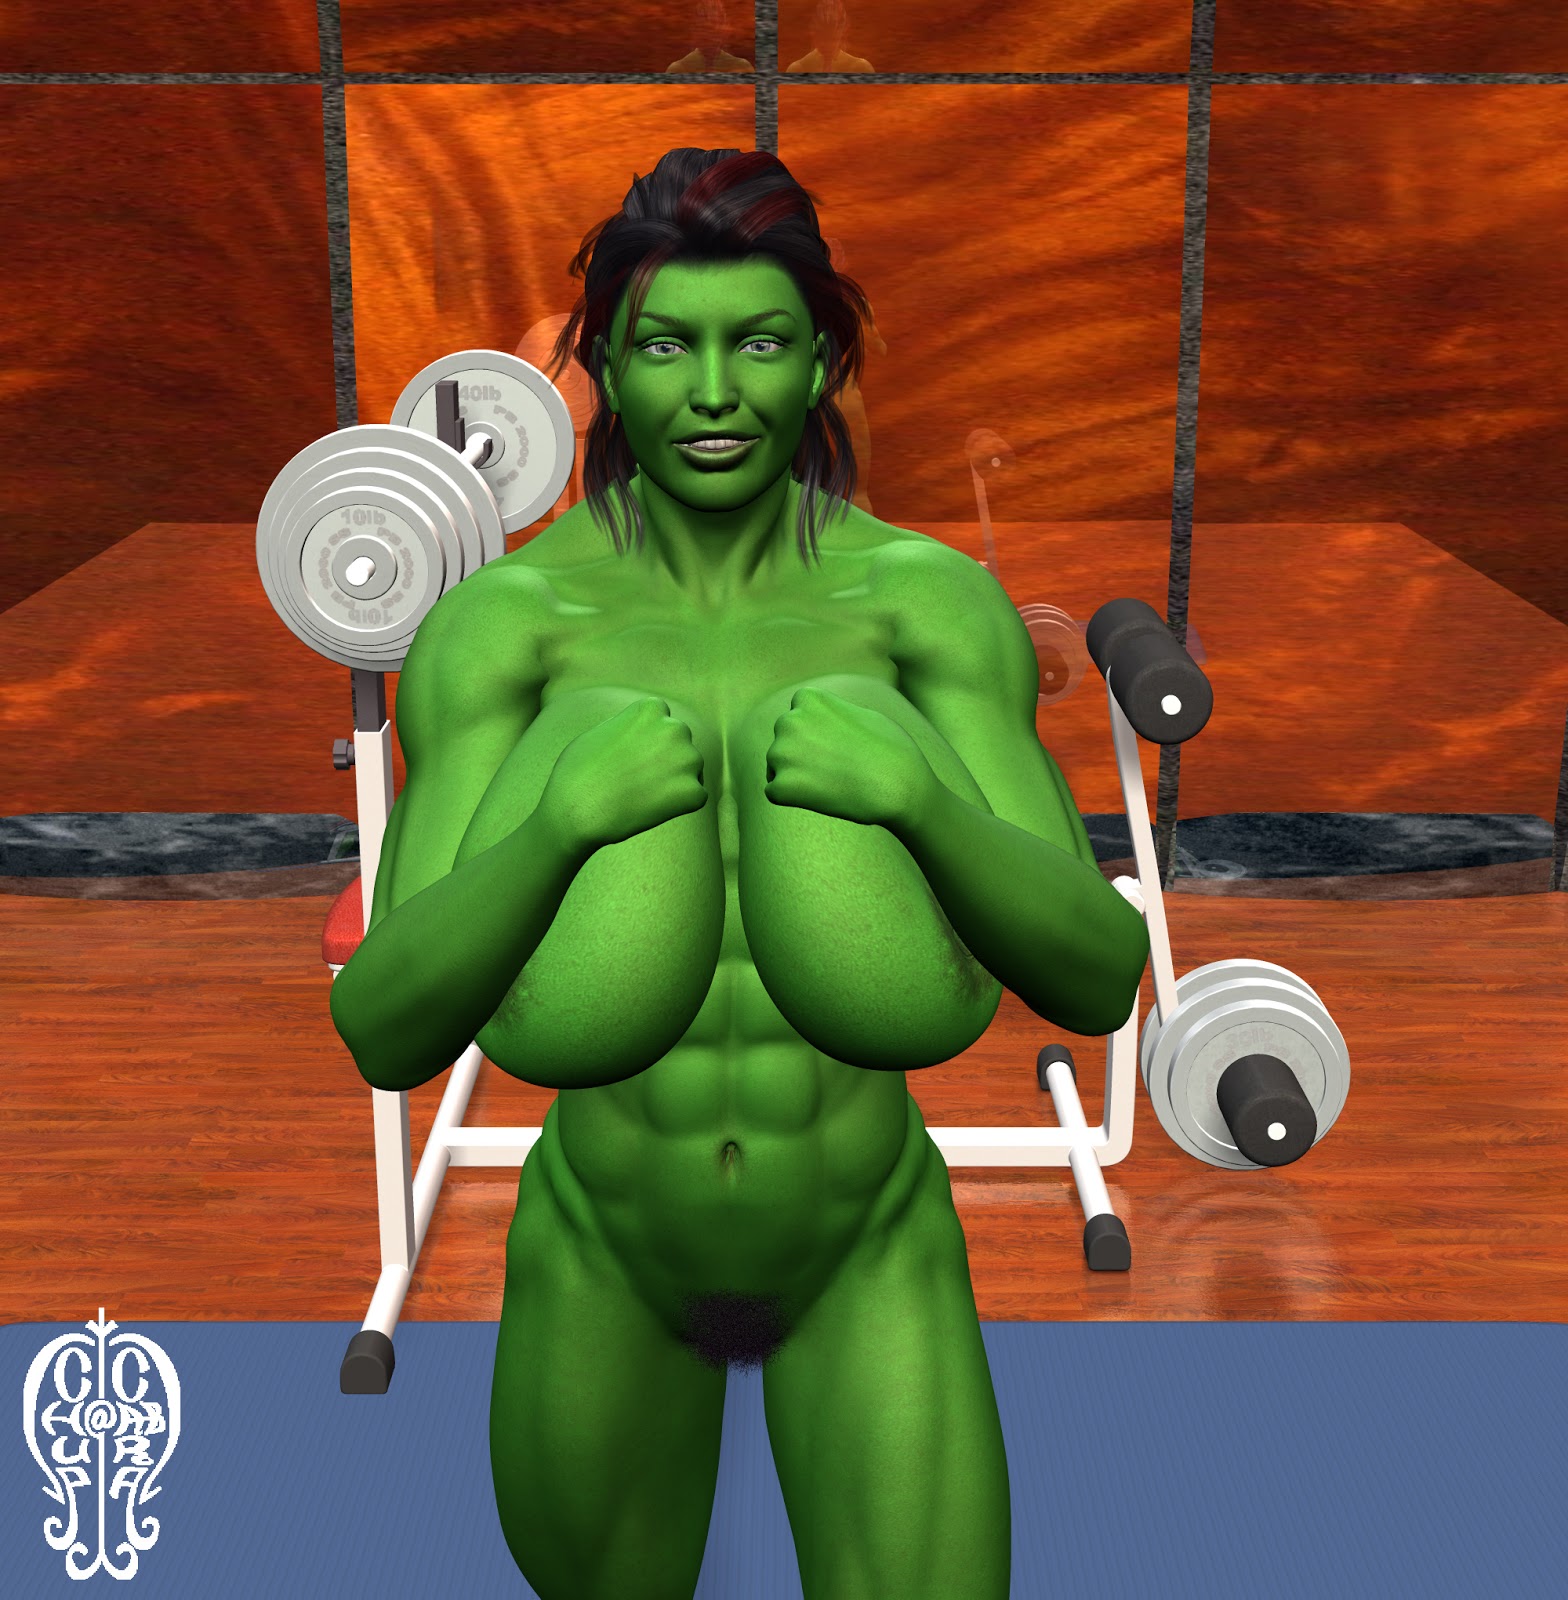 Just a couple of 'quick' images of She-Hulk, mainly to experiment...